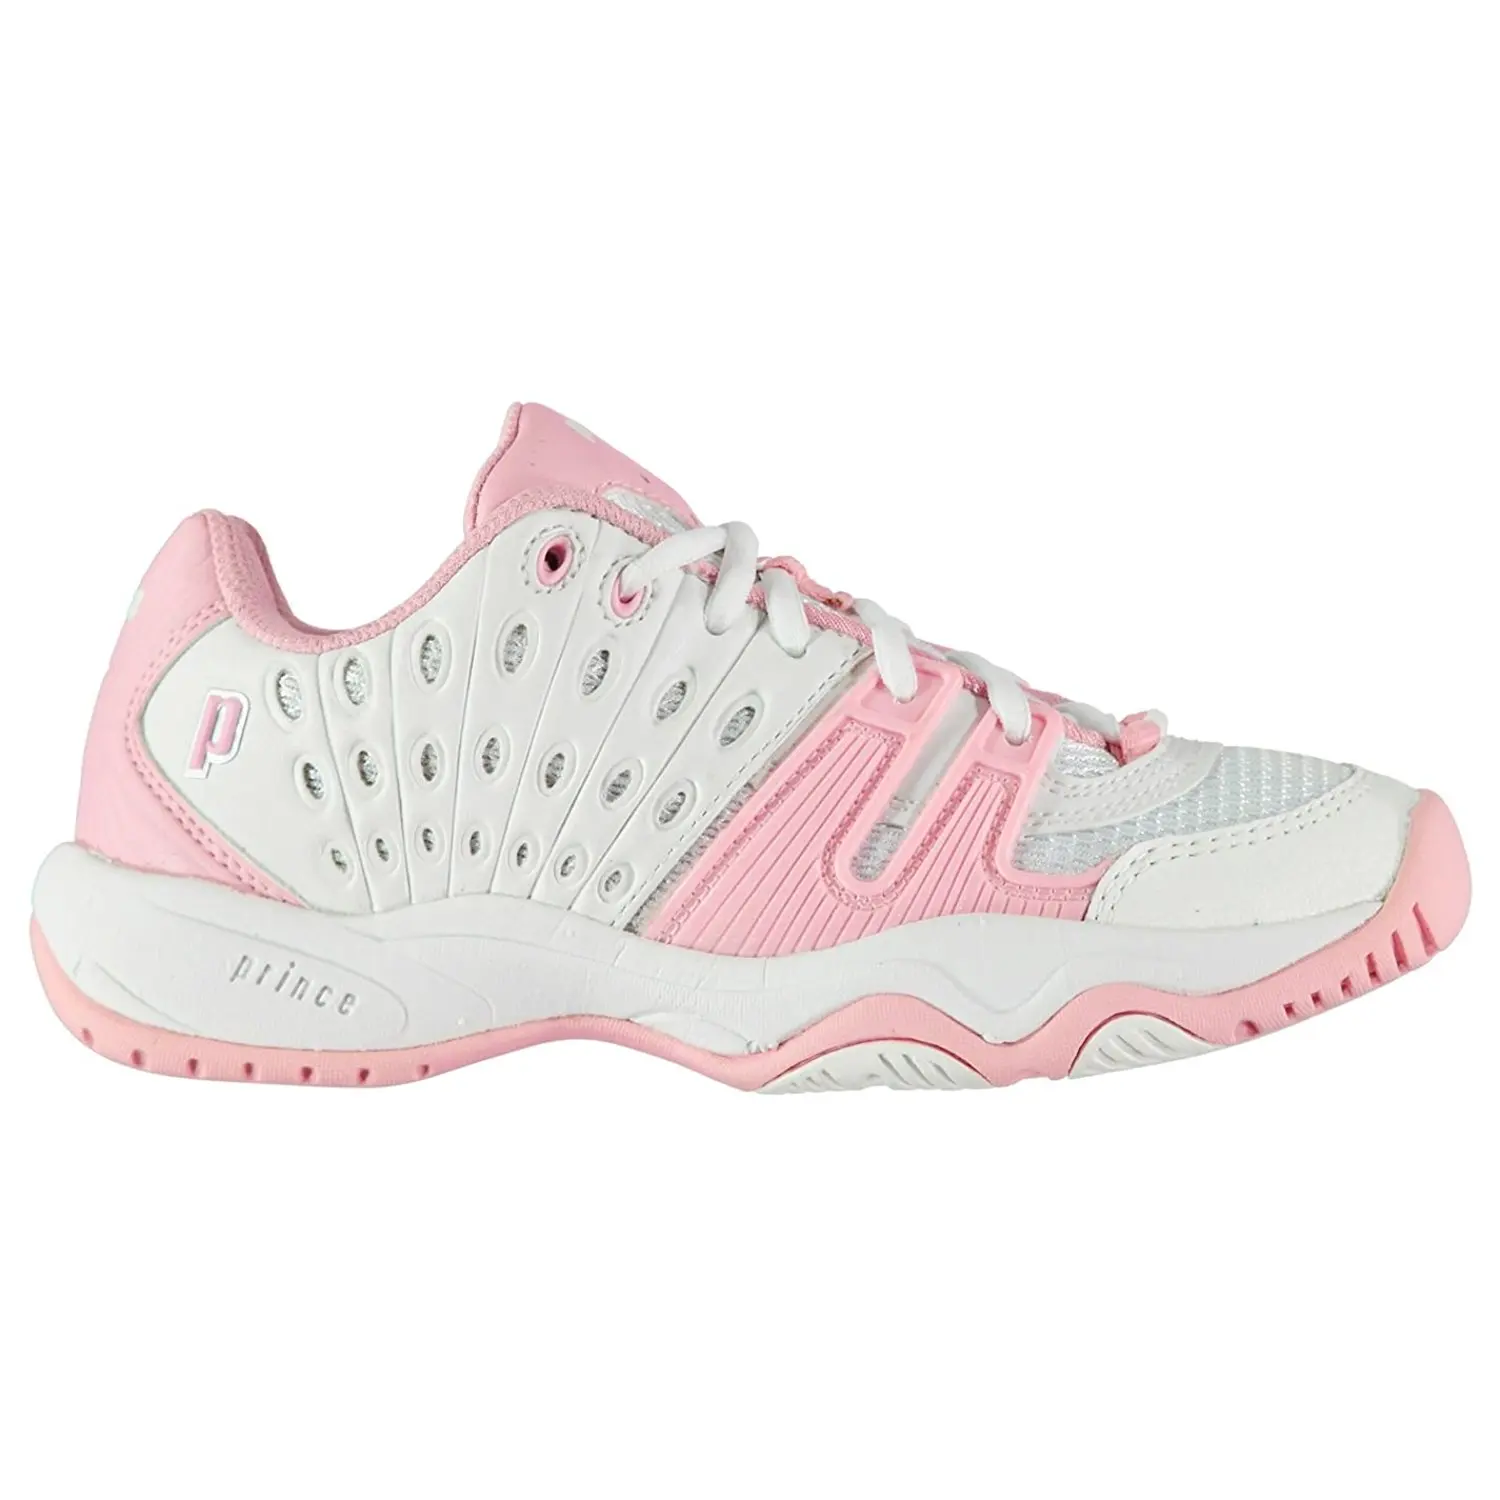 prince t22 tennis shoes womens